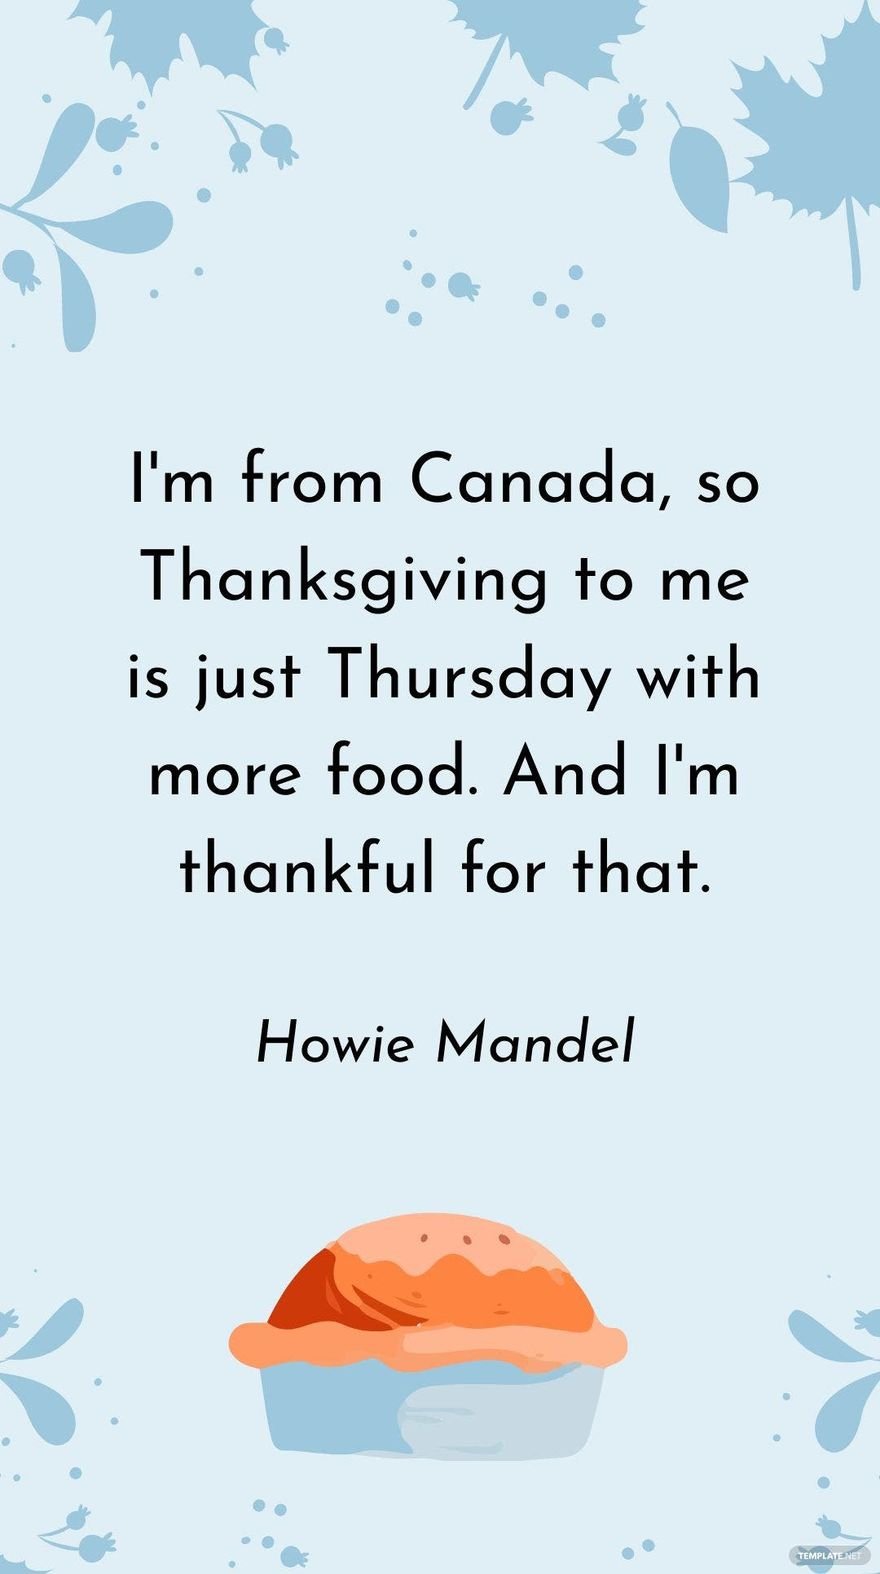 Howie Mandel - I'm from Canada, so Thanksgiving to me is just Thursday with more food. And I'm thankful for that.